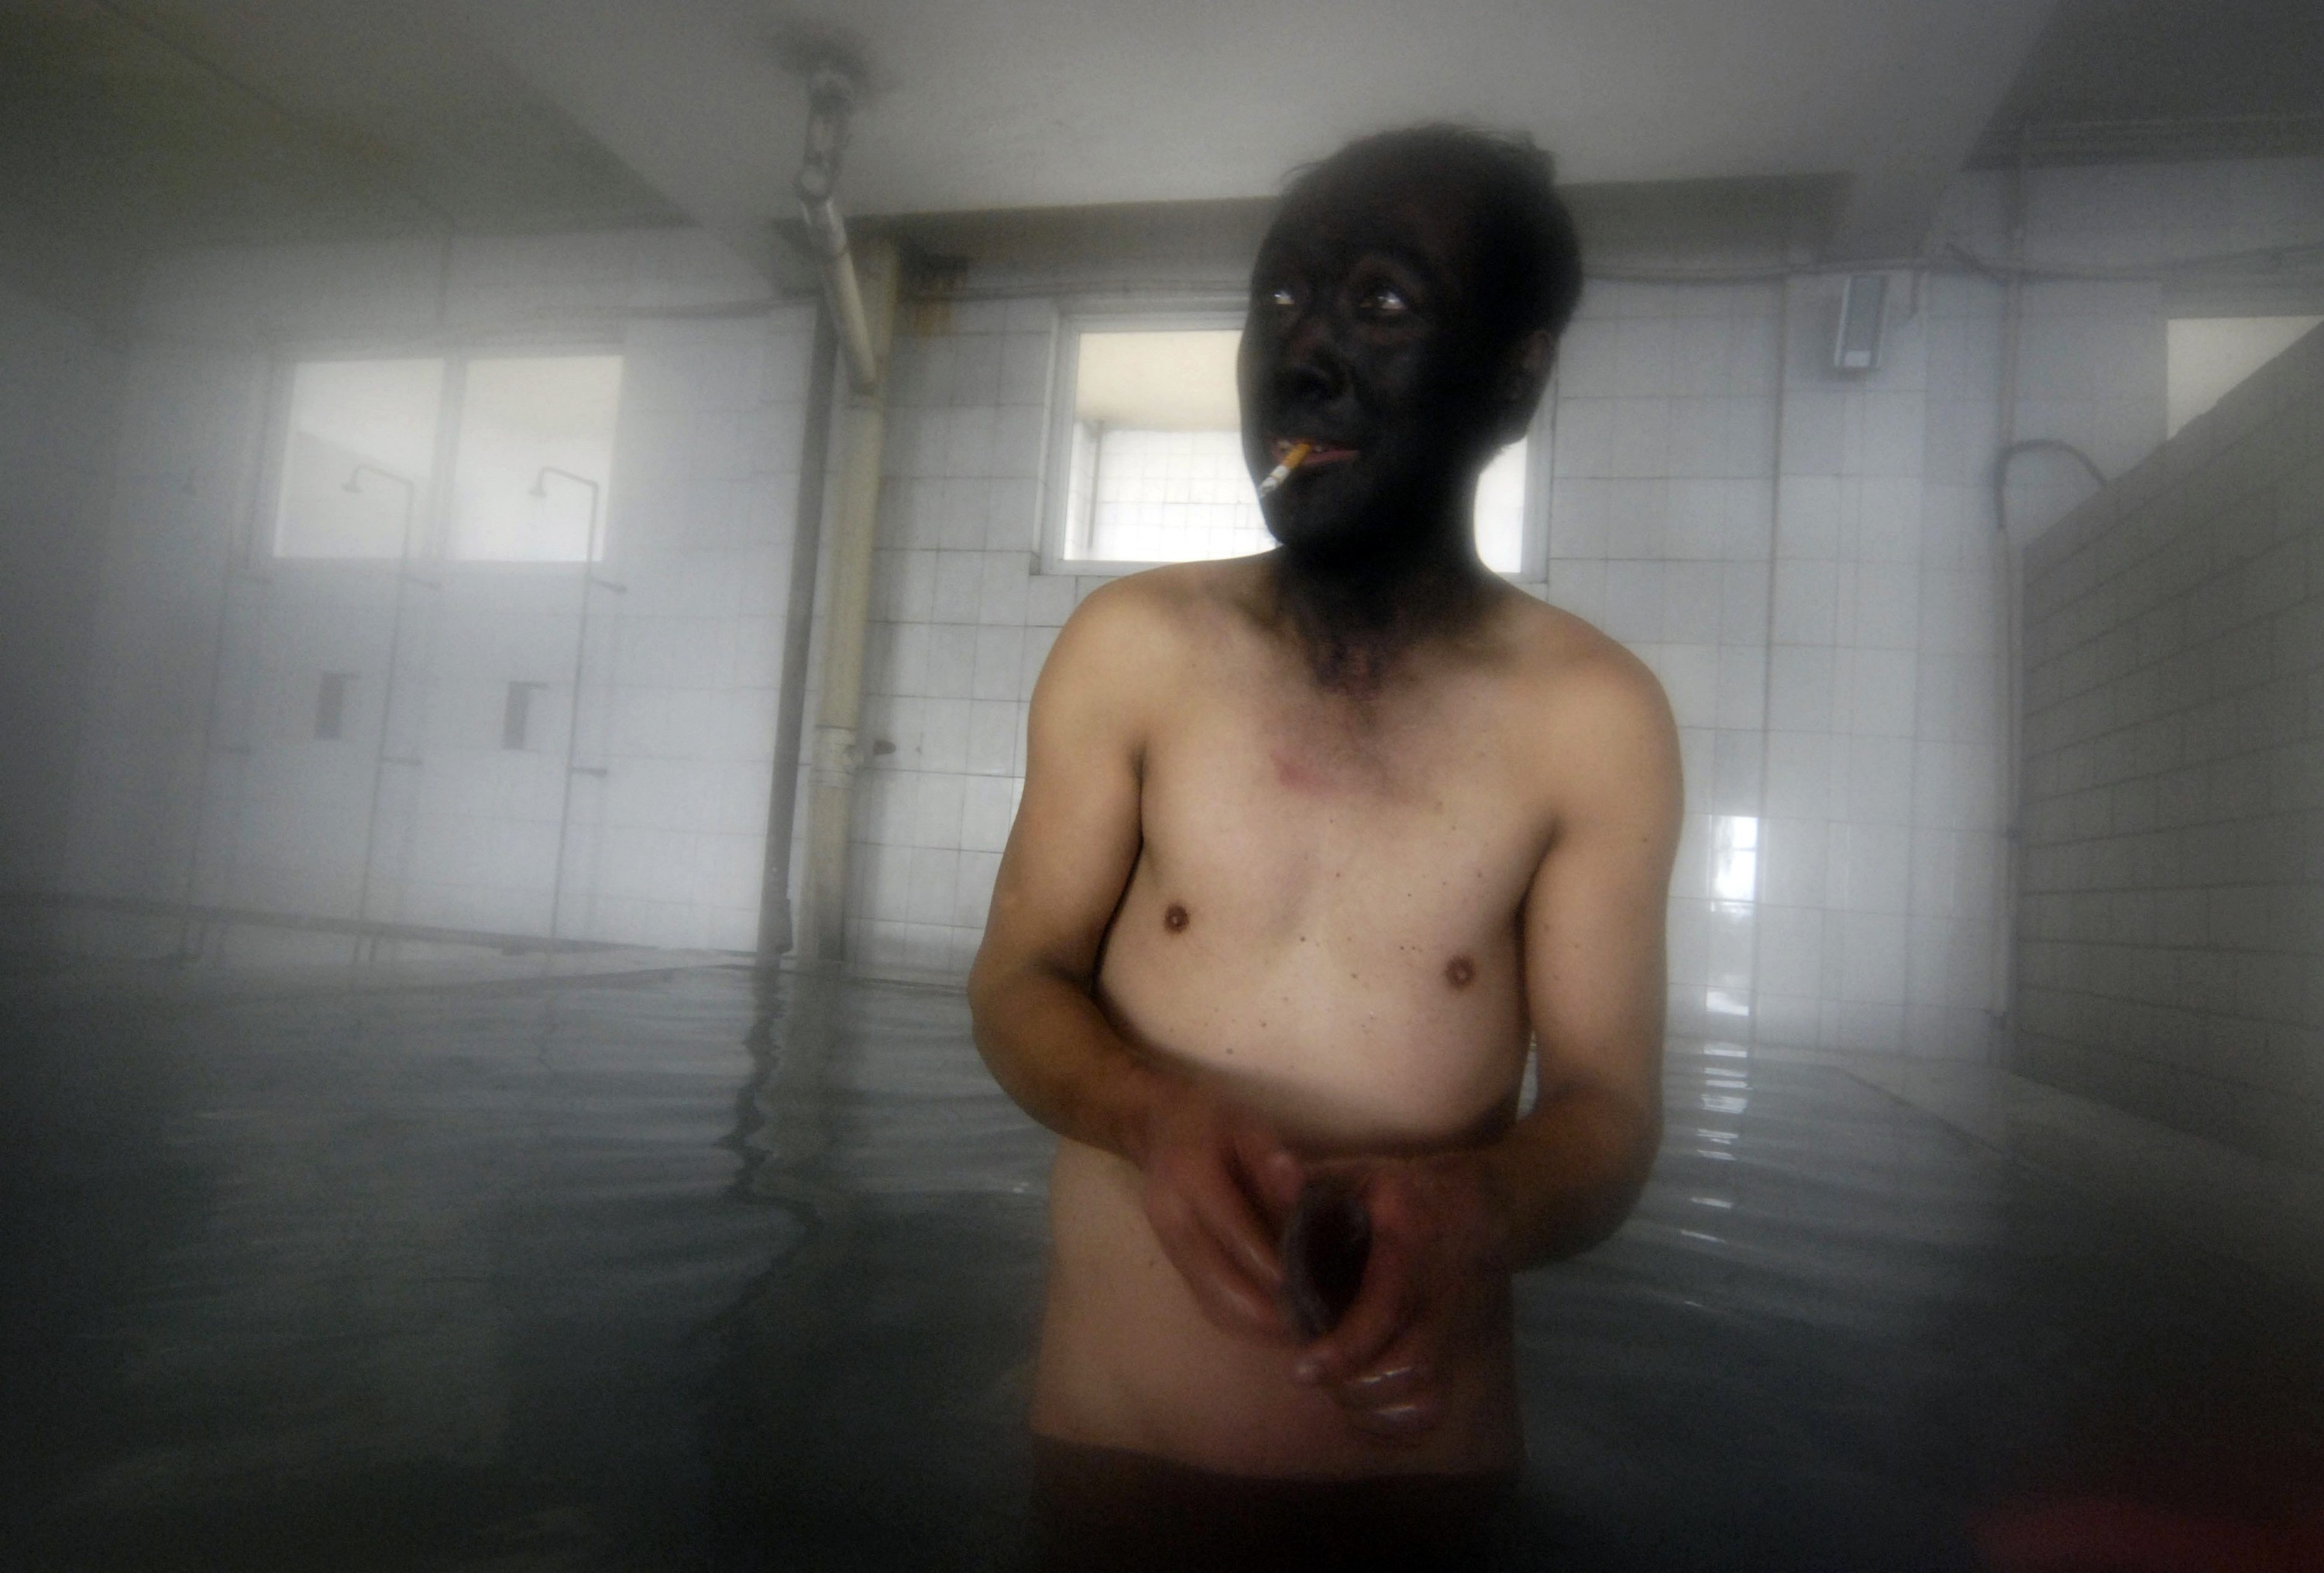 A coal miner takes a bath after his shift at a mine in Changzhi, China